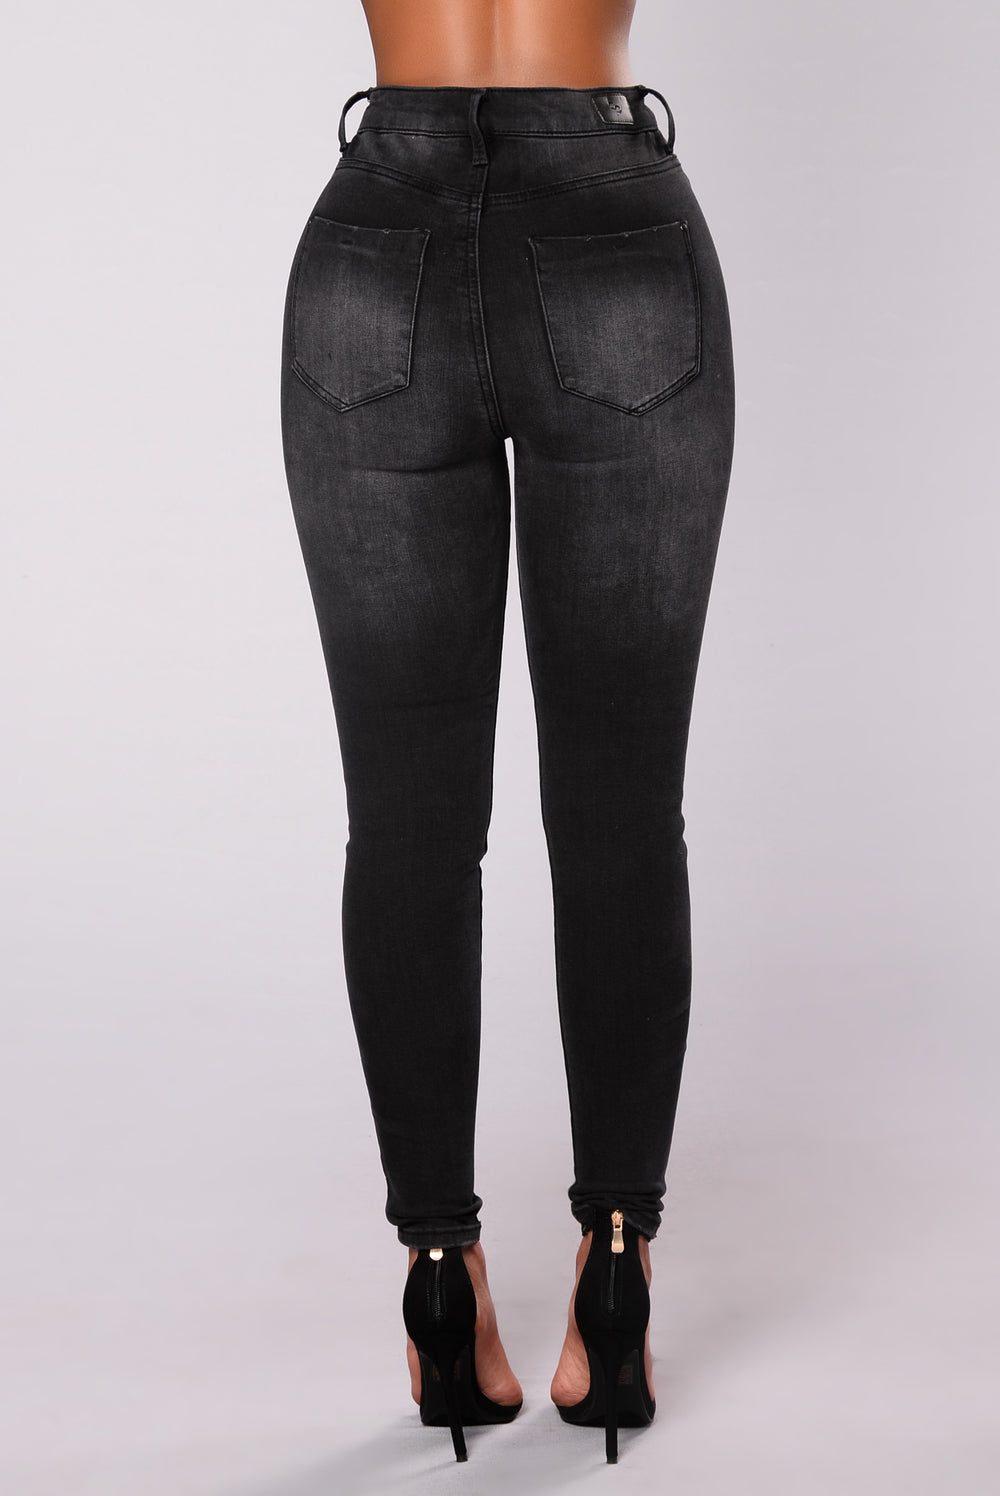 Willing To Wait Jeans - Black